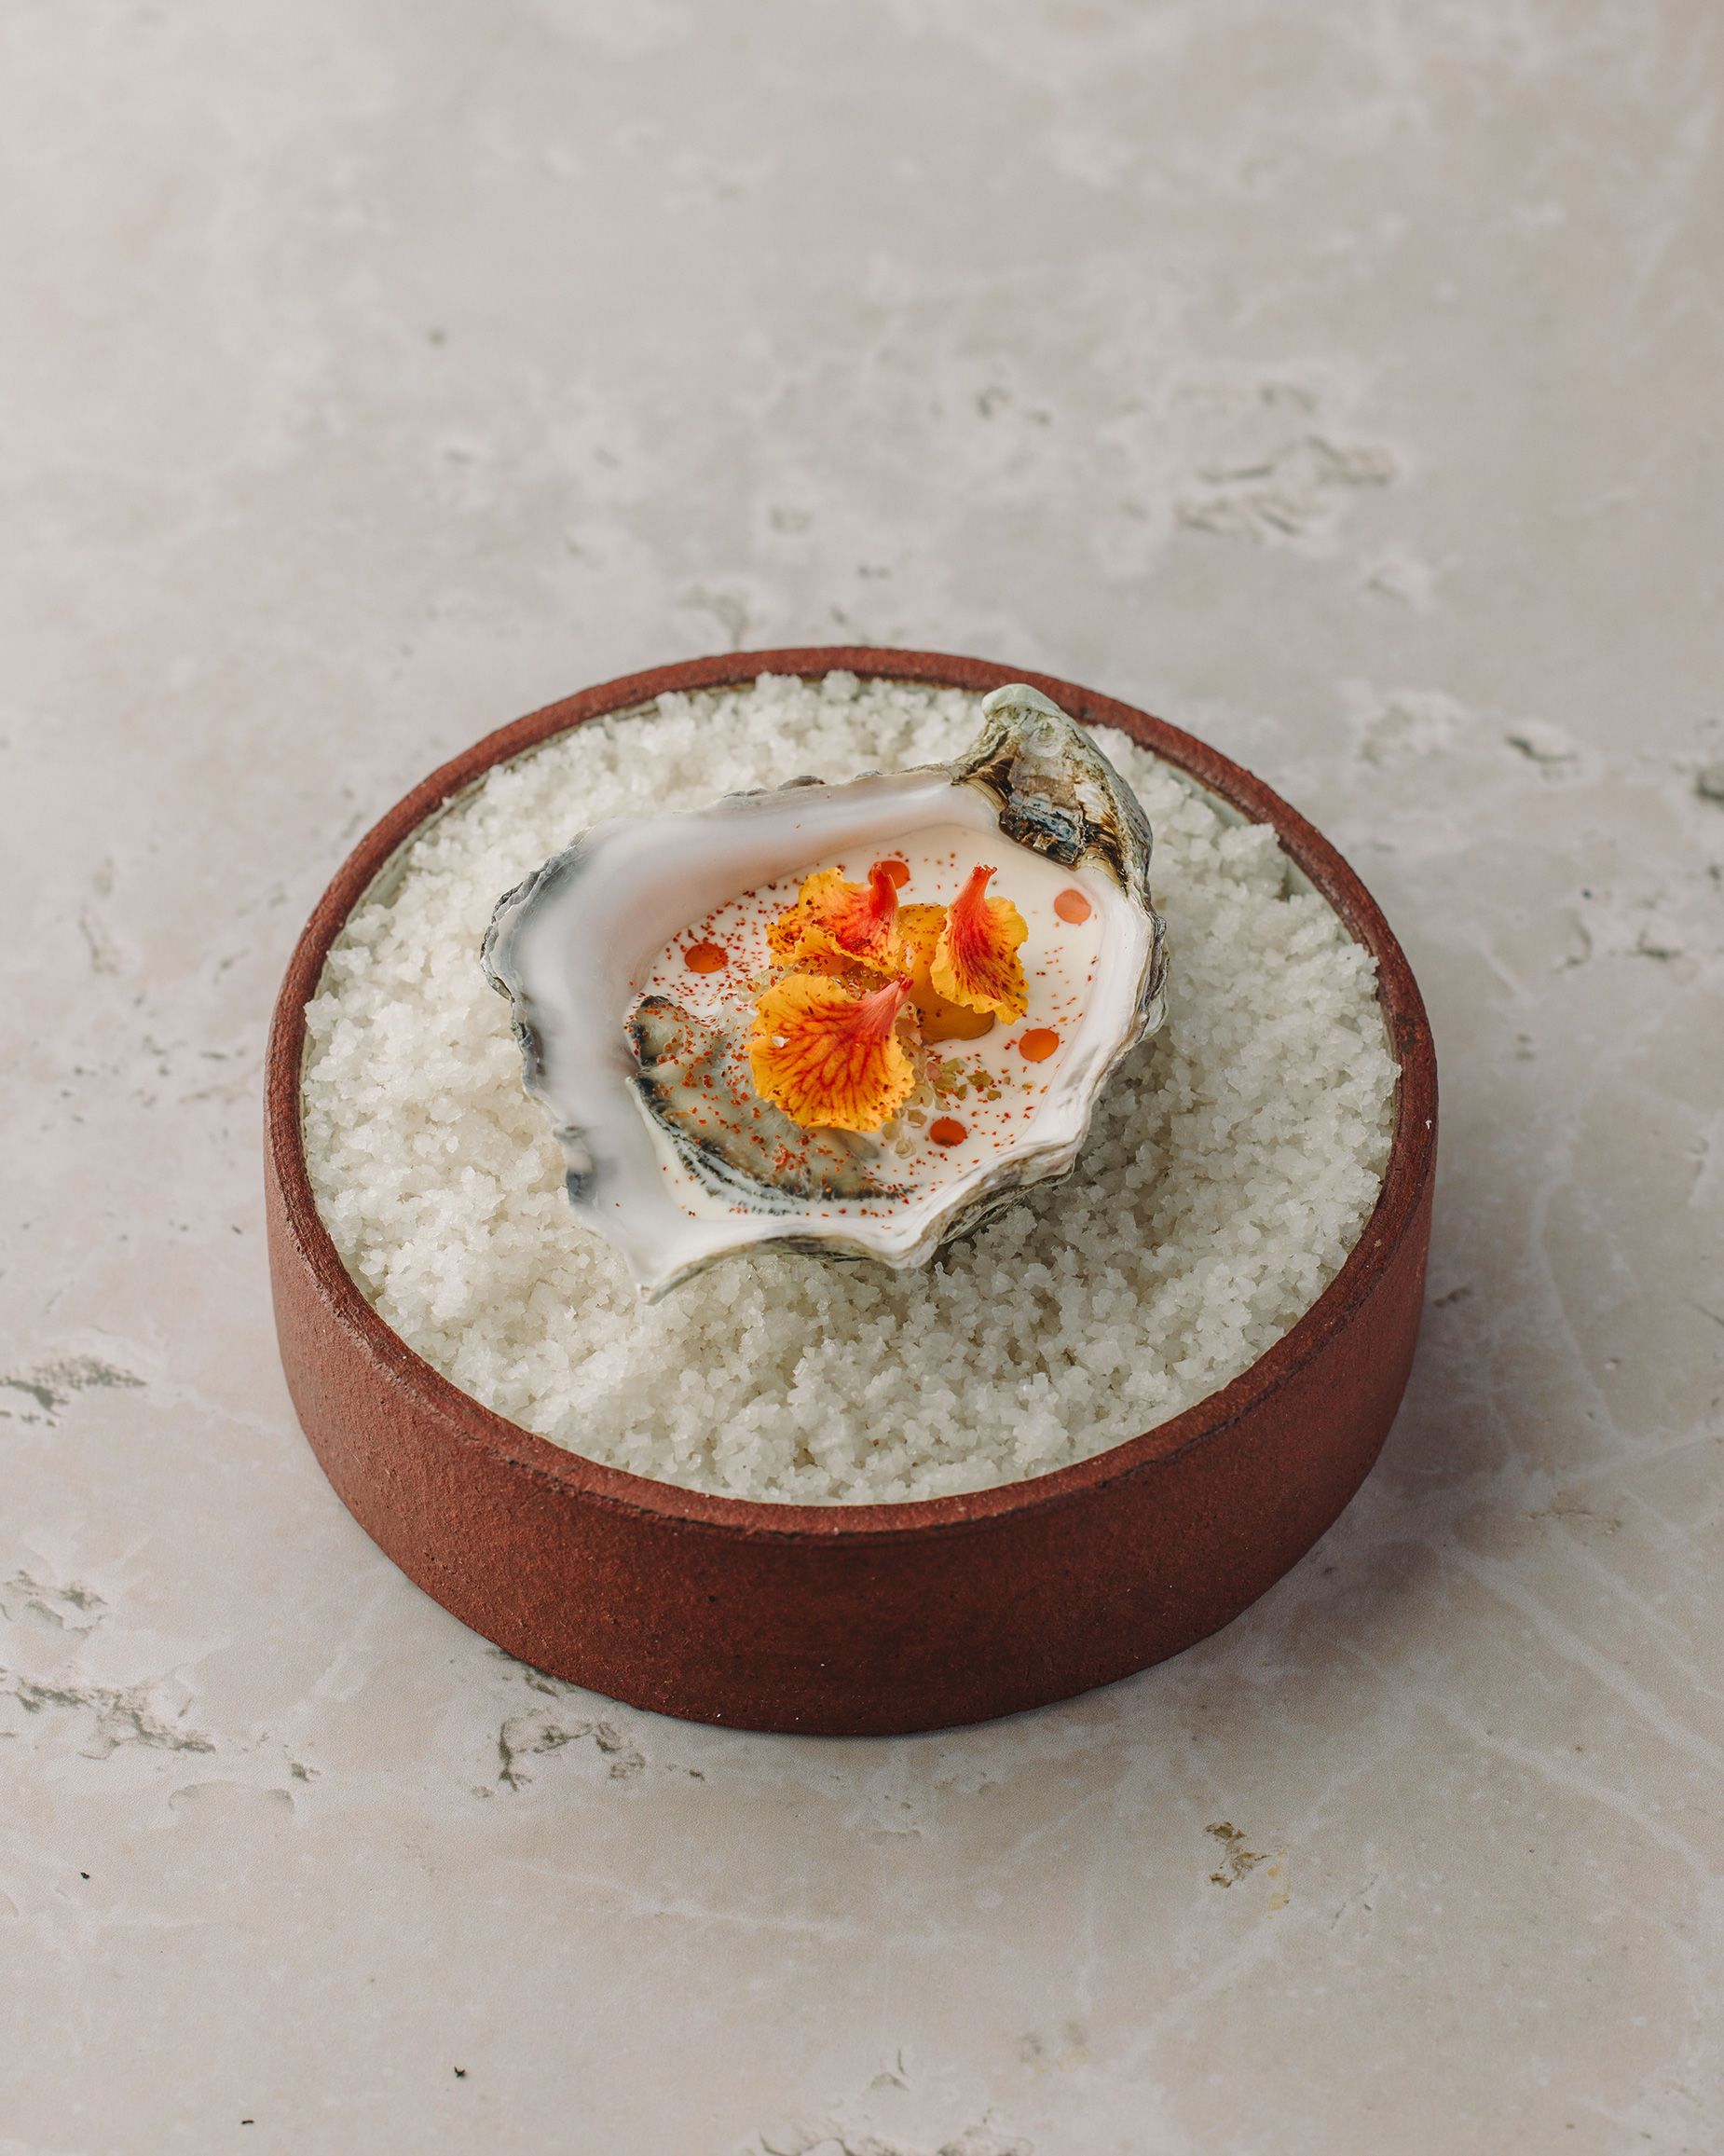 Oyster with smoked cream and nutty sea buckthorn oil.